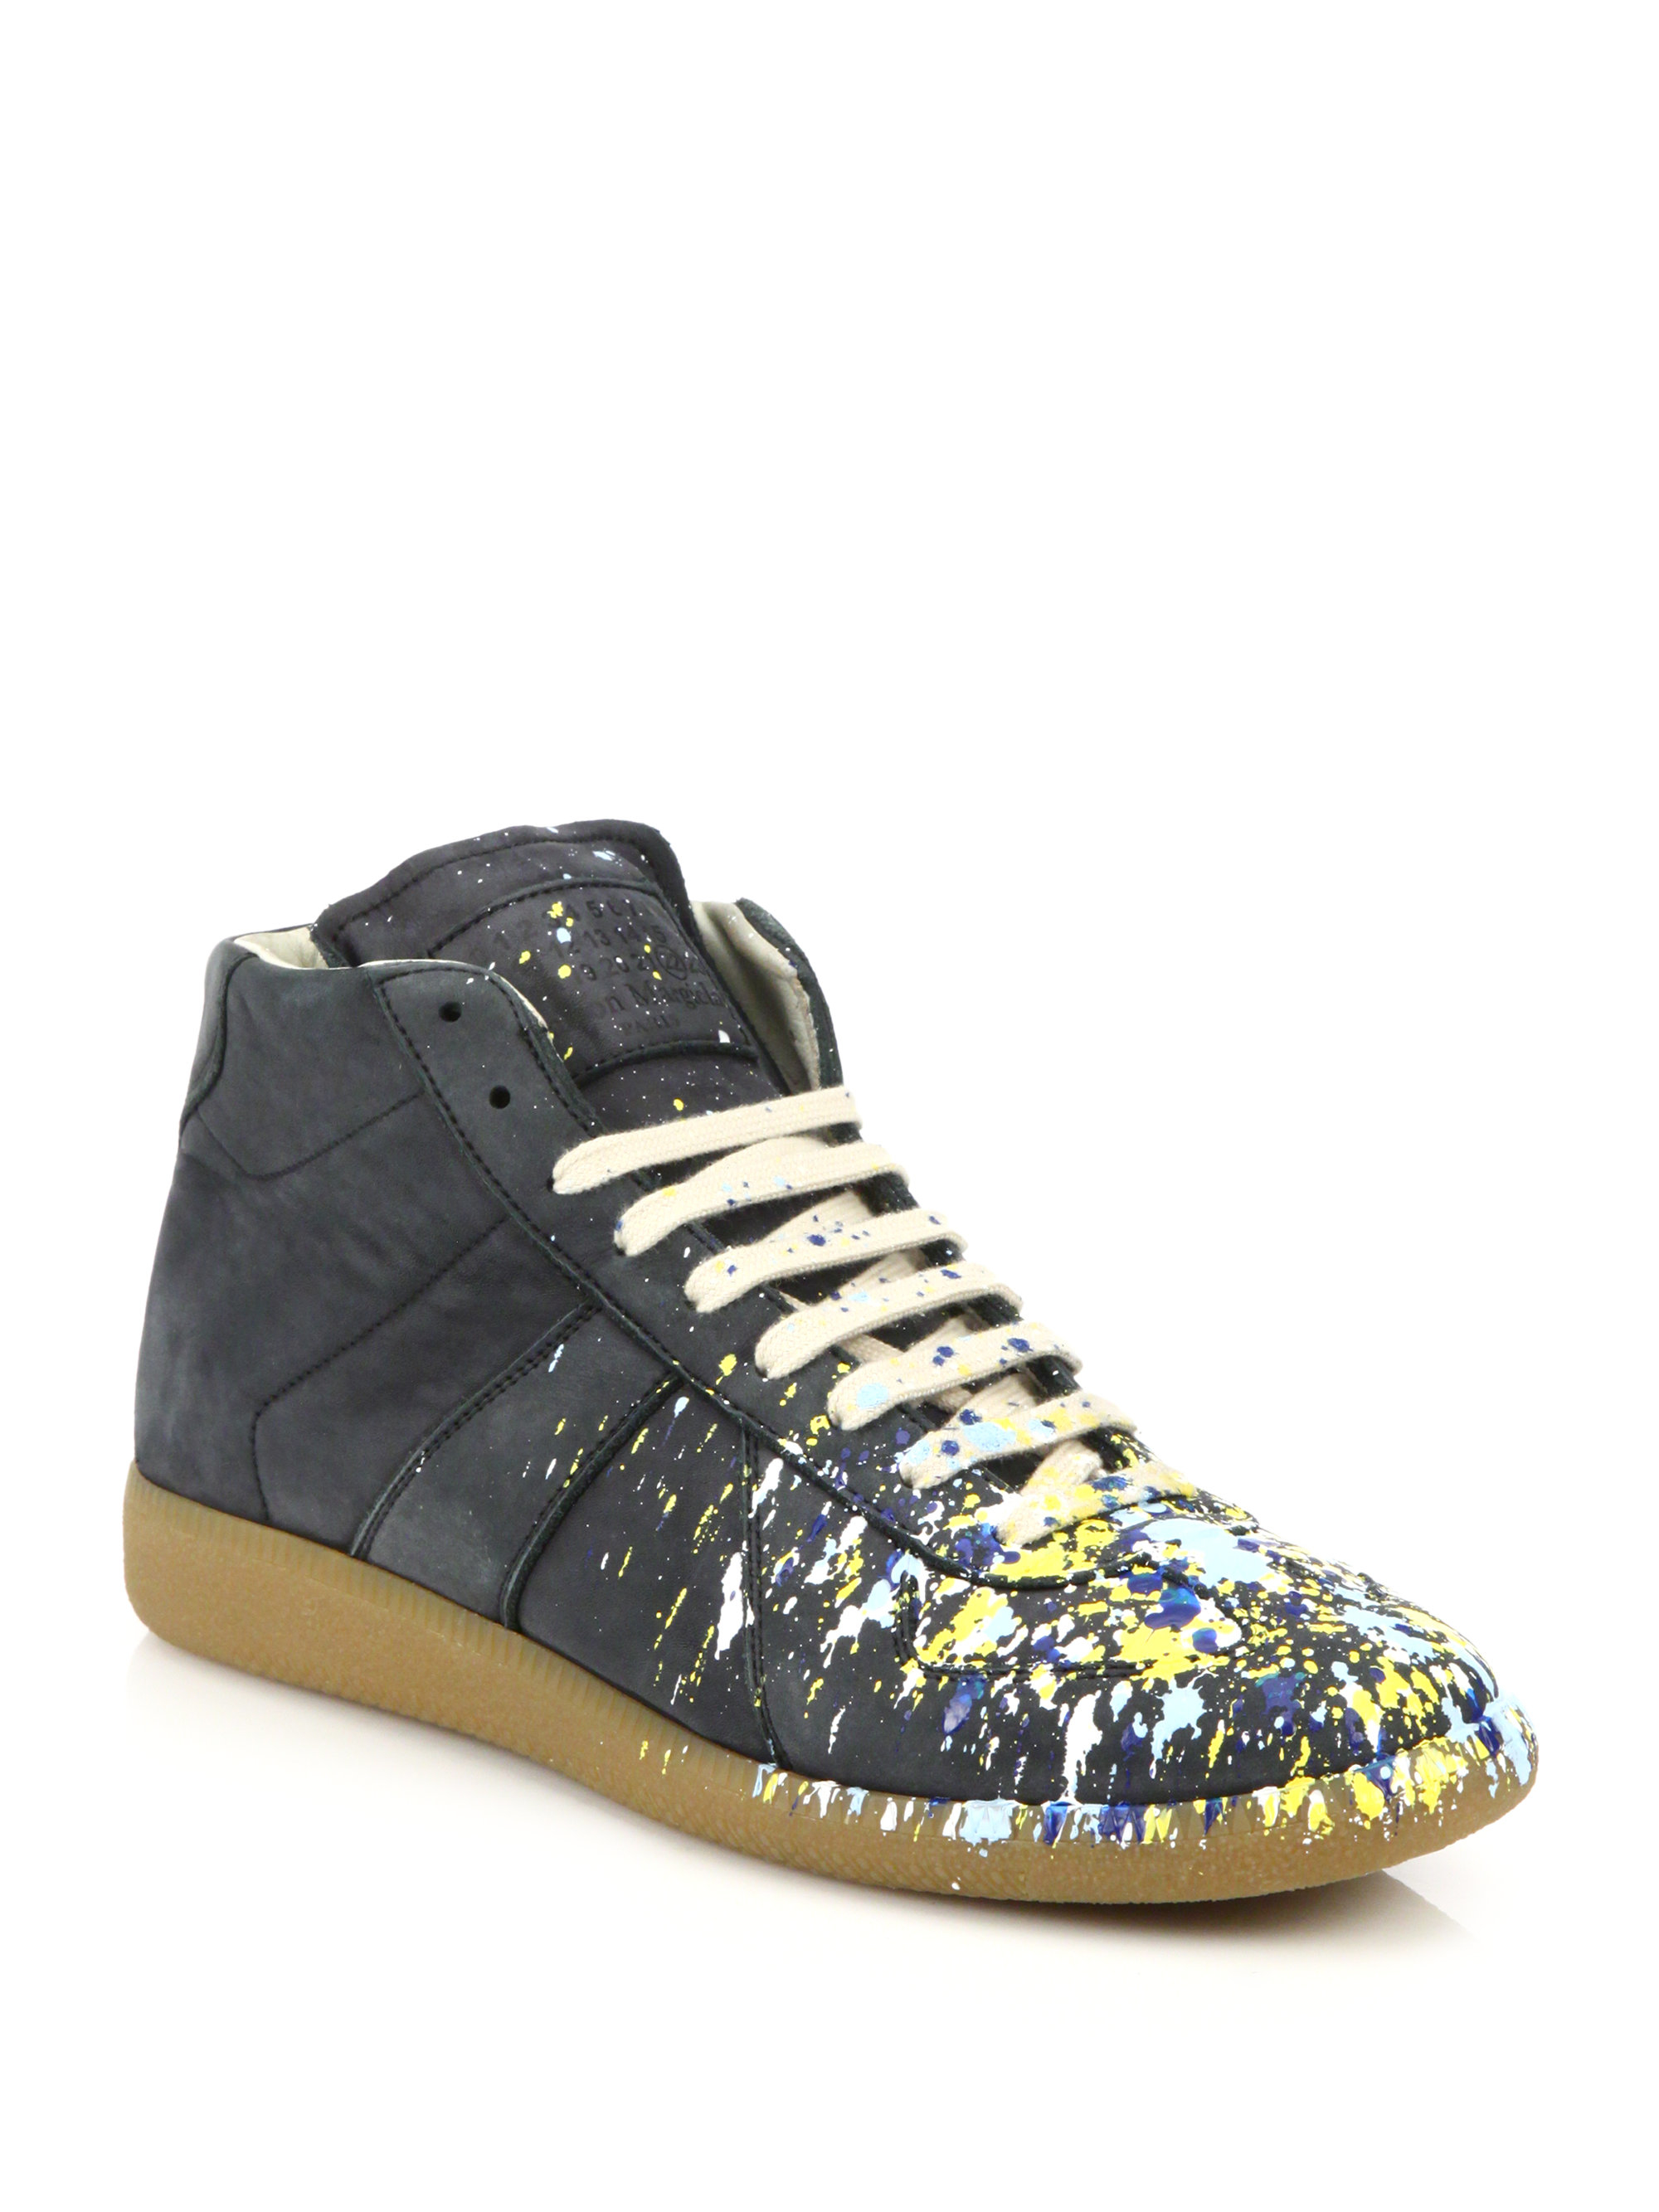 Maison margiela Replica High-top Paint-effect Leather Trainers in Blue